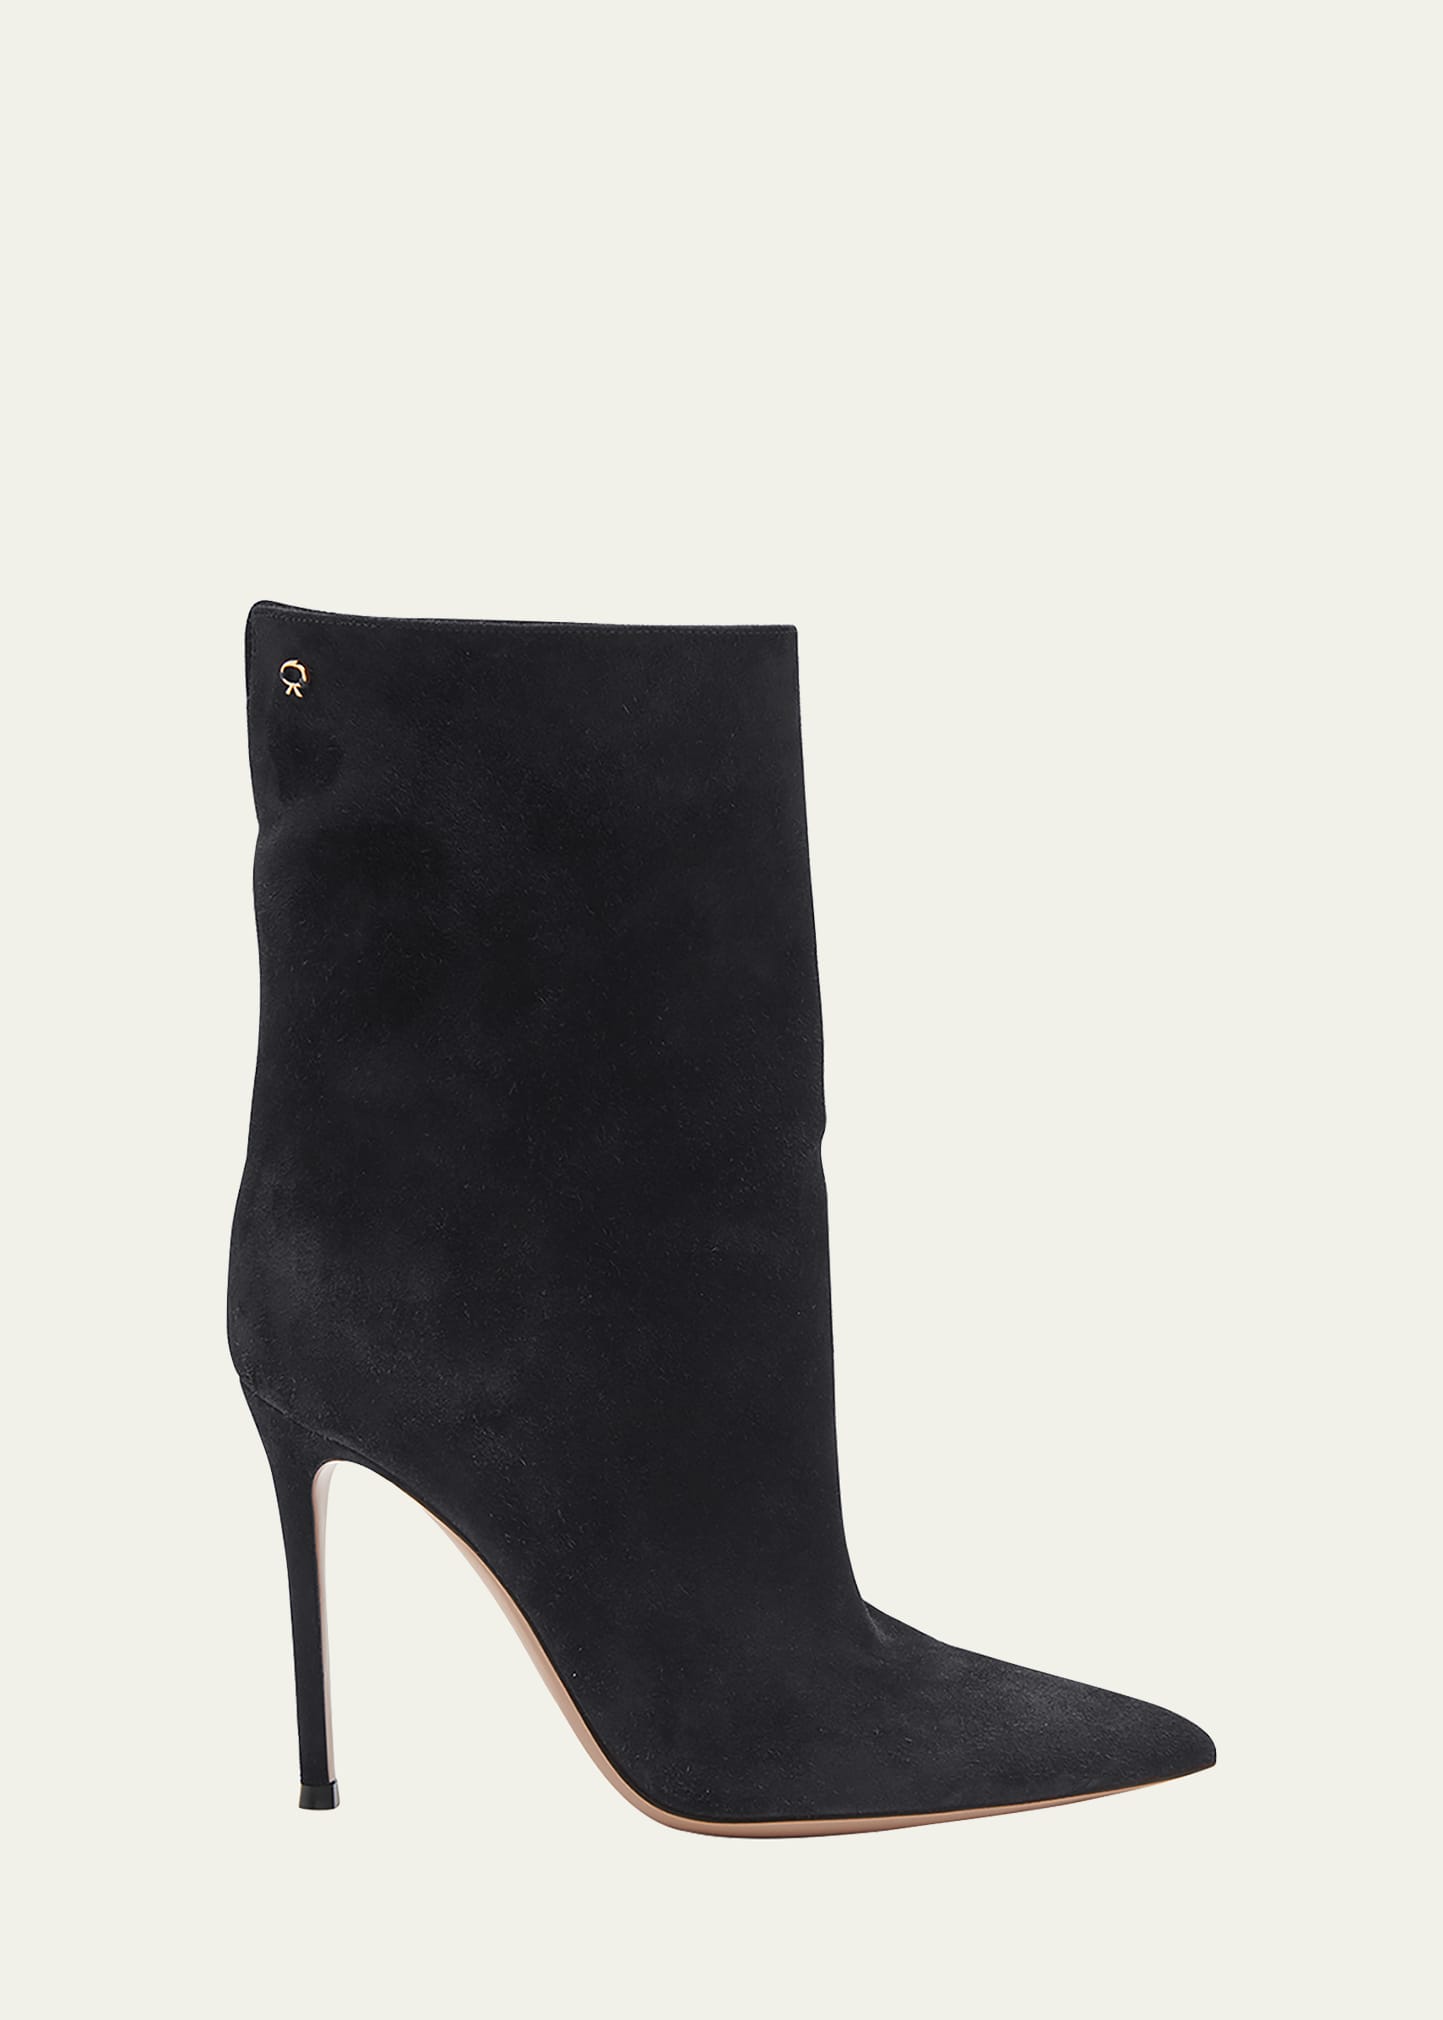 Gianvito Rossi Suede Stiletto Ankle Booties In Black